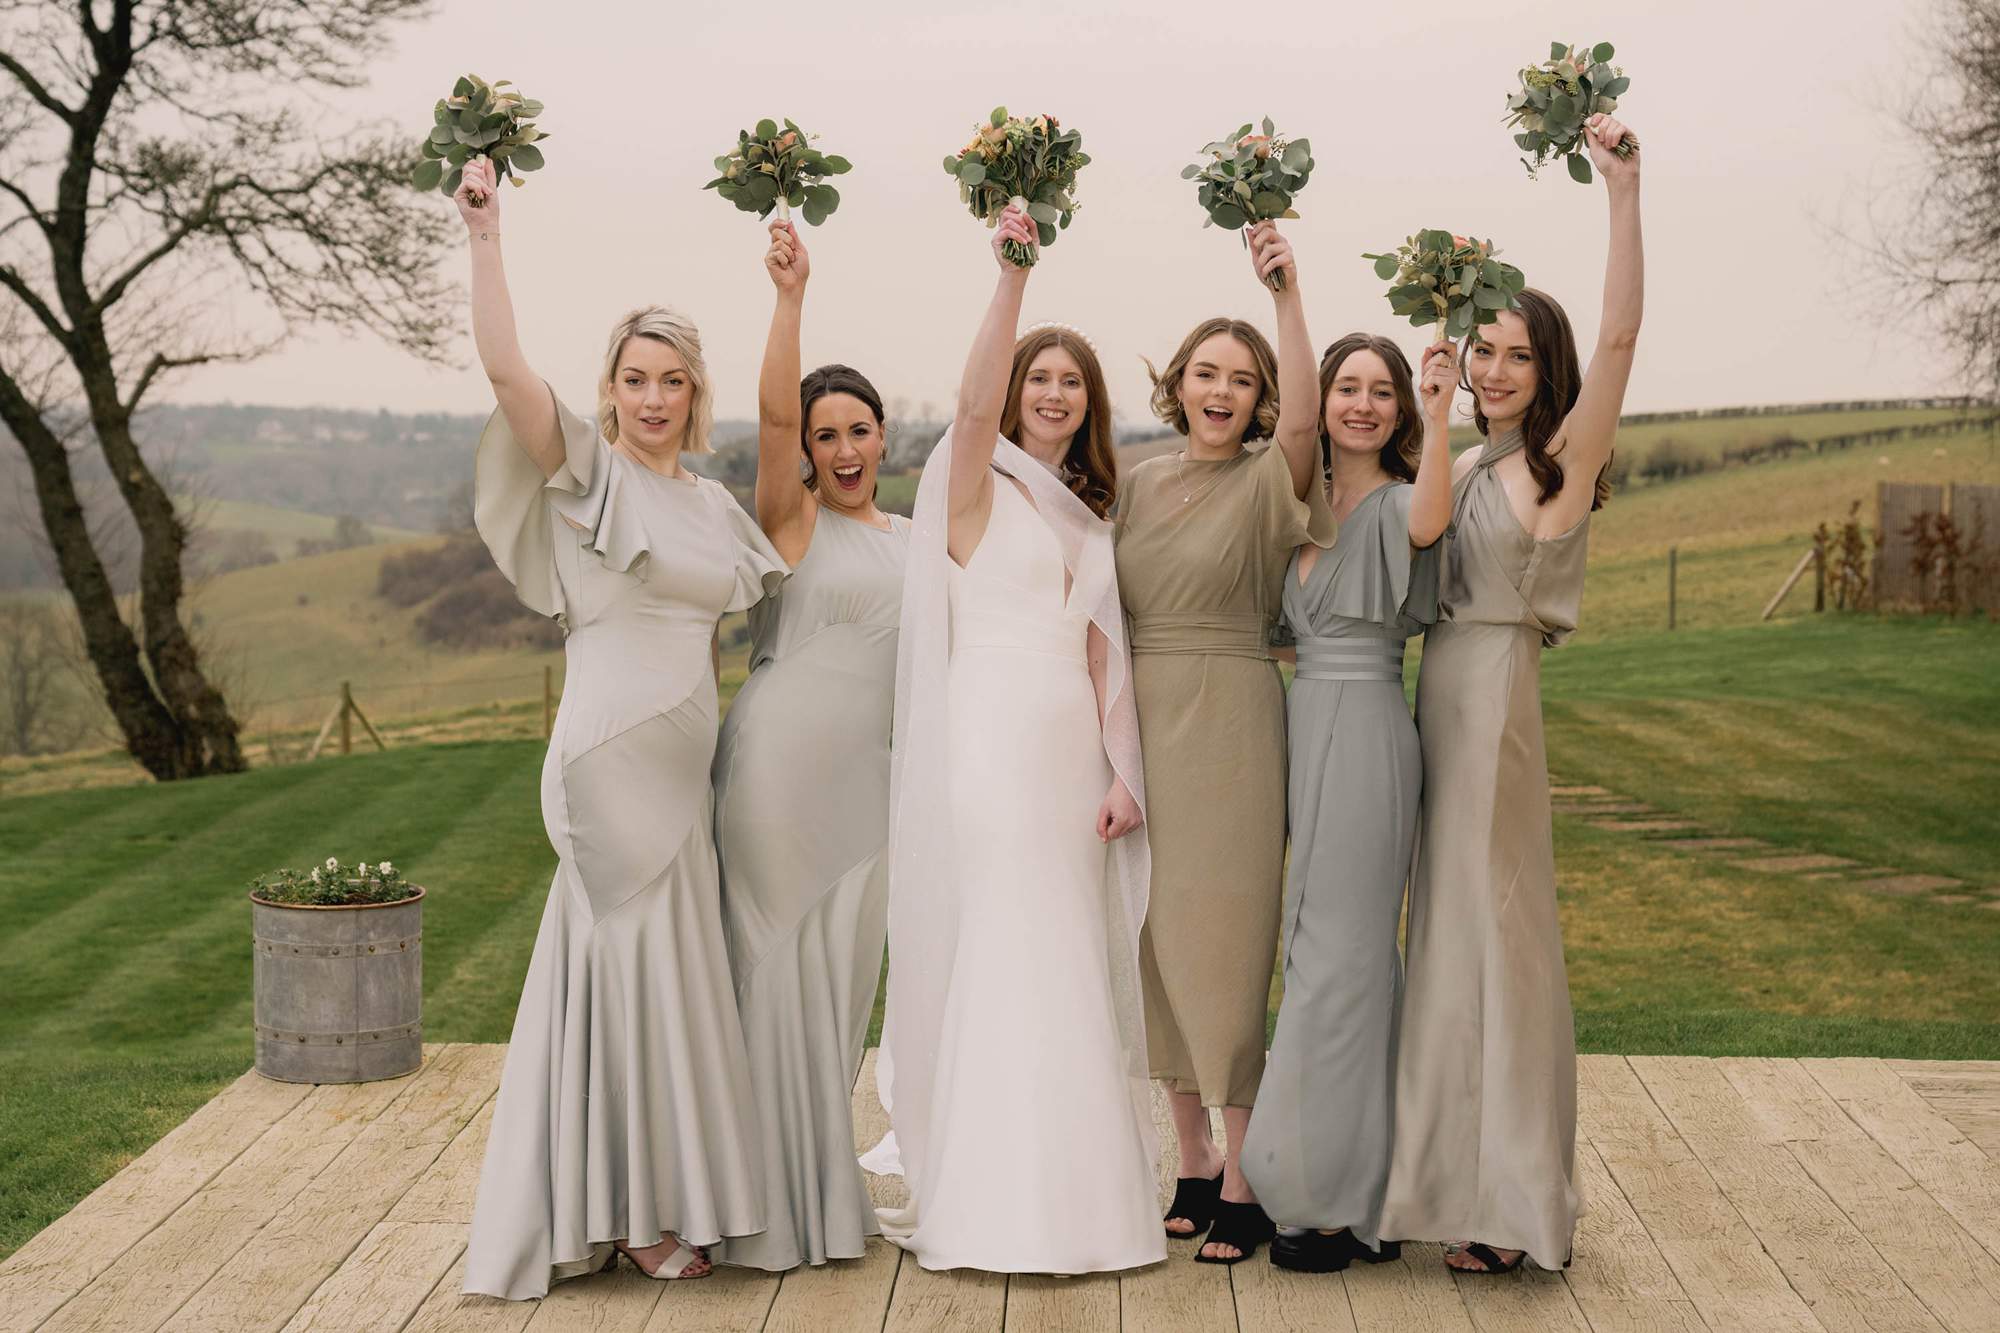 bride and her bridesmaids raise their bouquets in celebration at the Barn at Botley Hill wedding venue in the Surrey Hills.